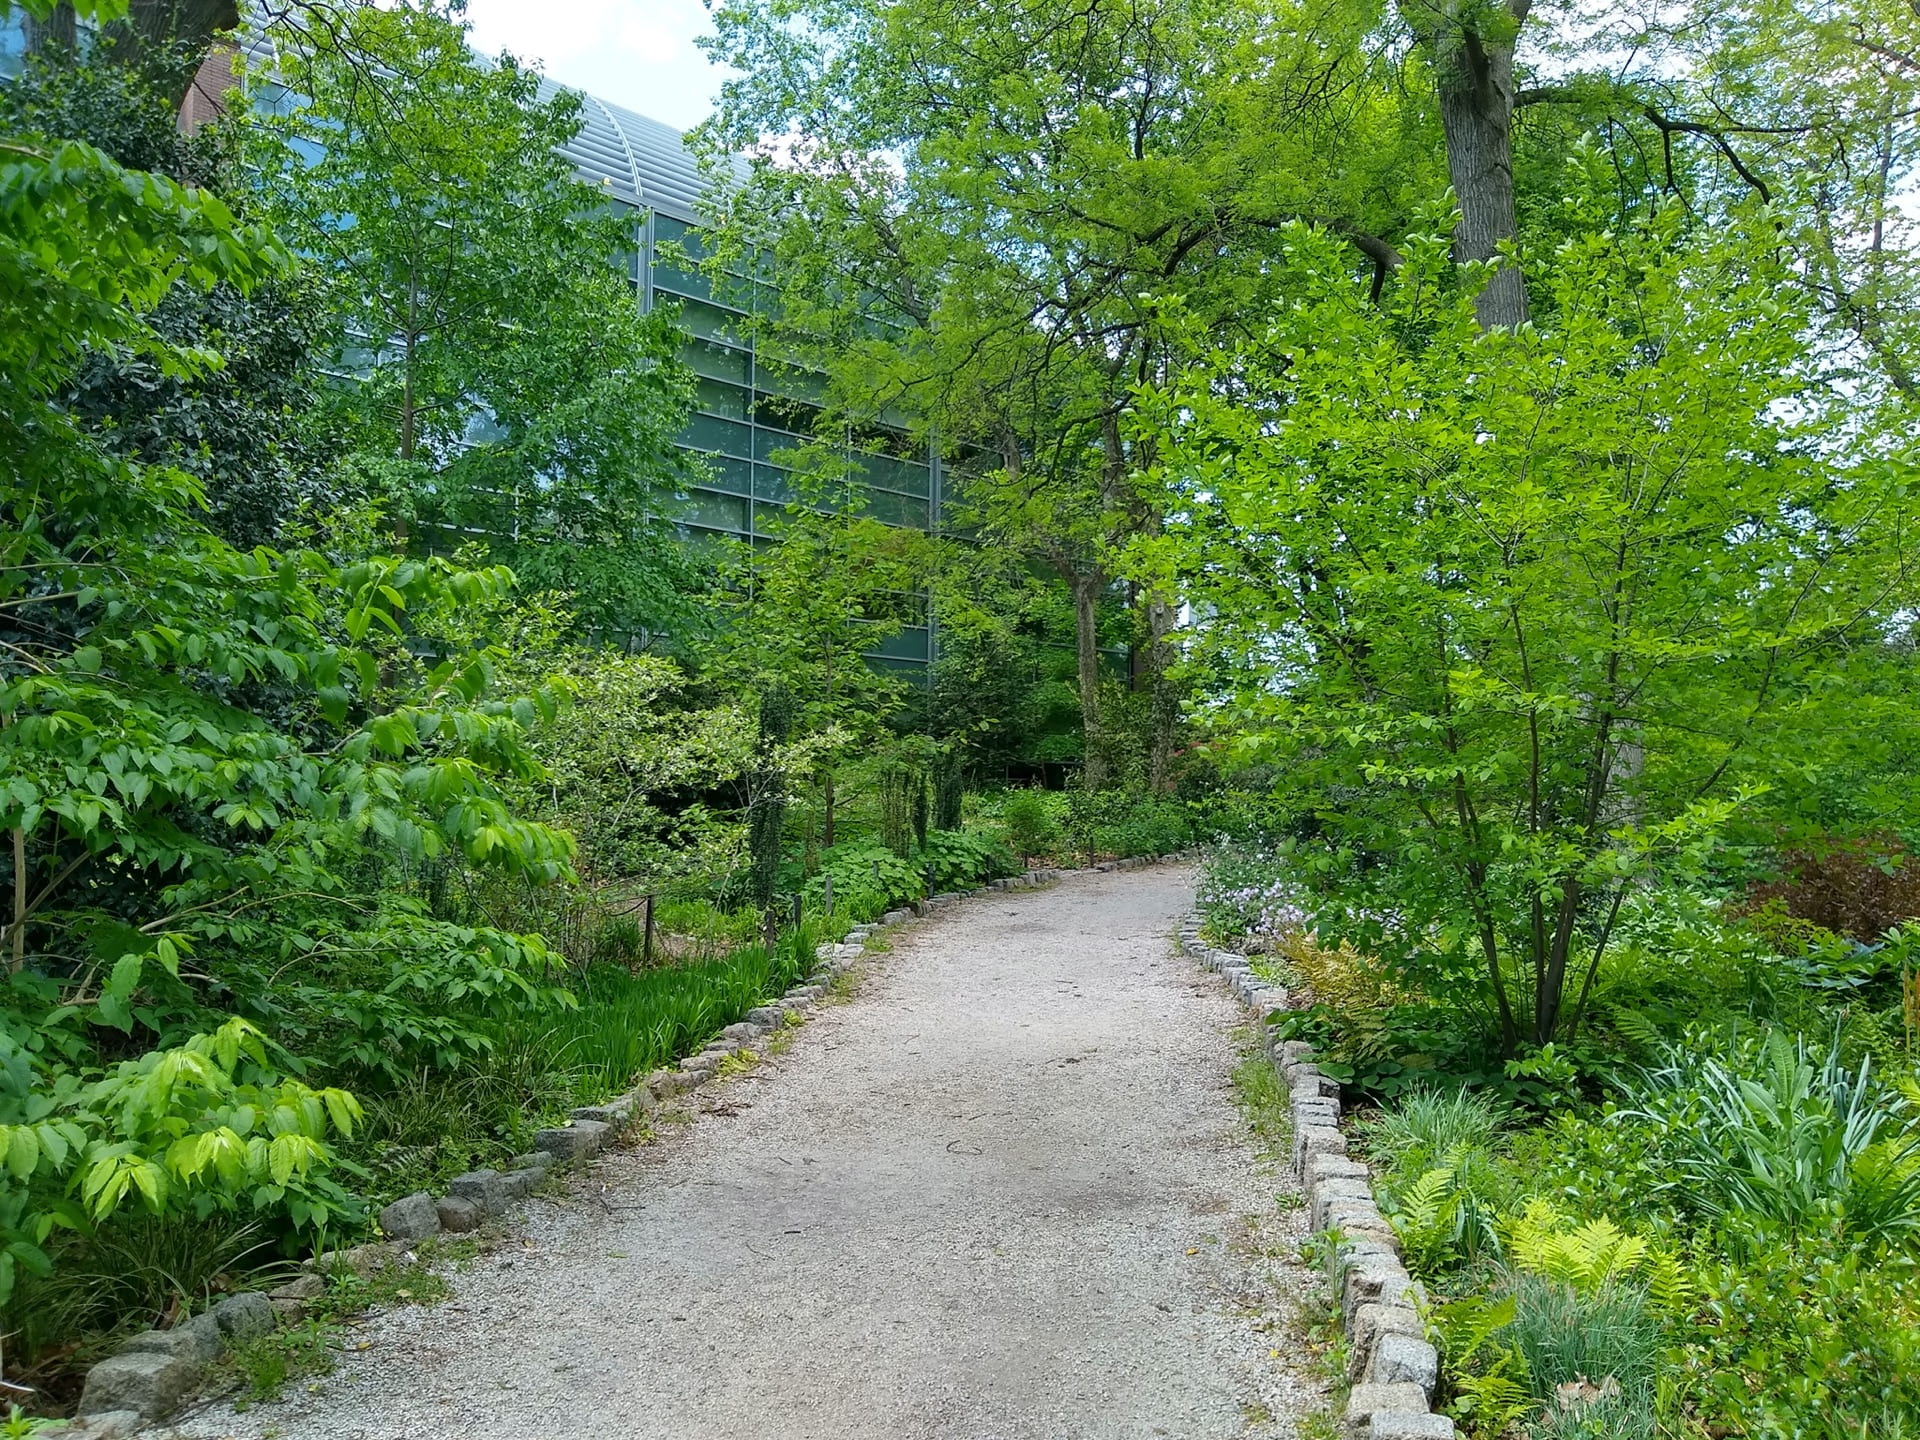 A spring view looking down the Main Path.